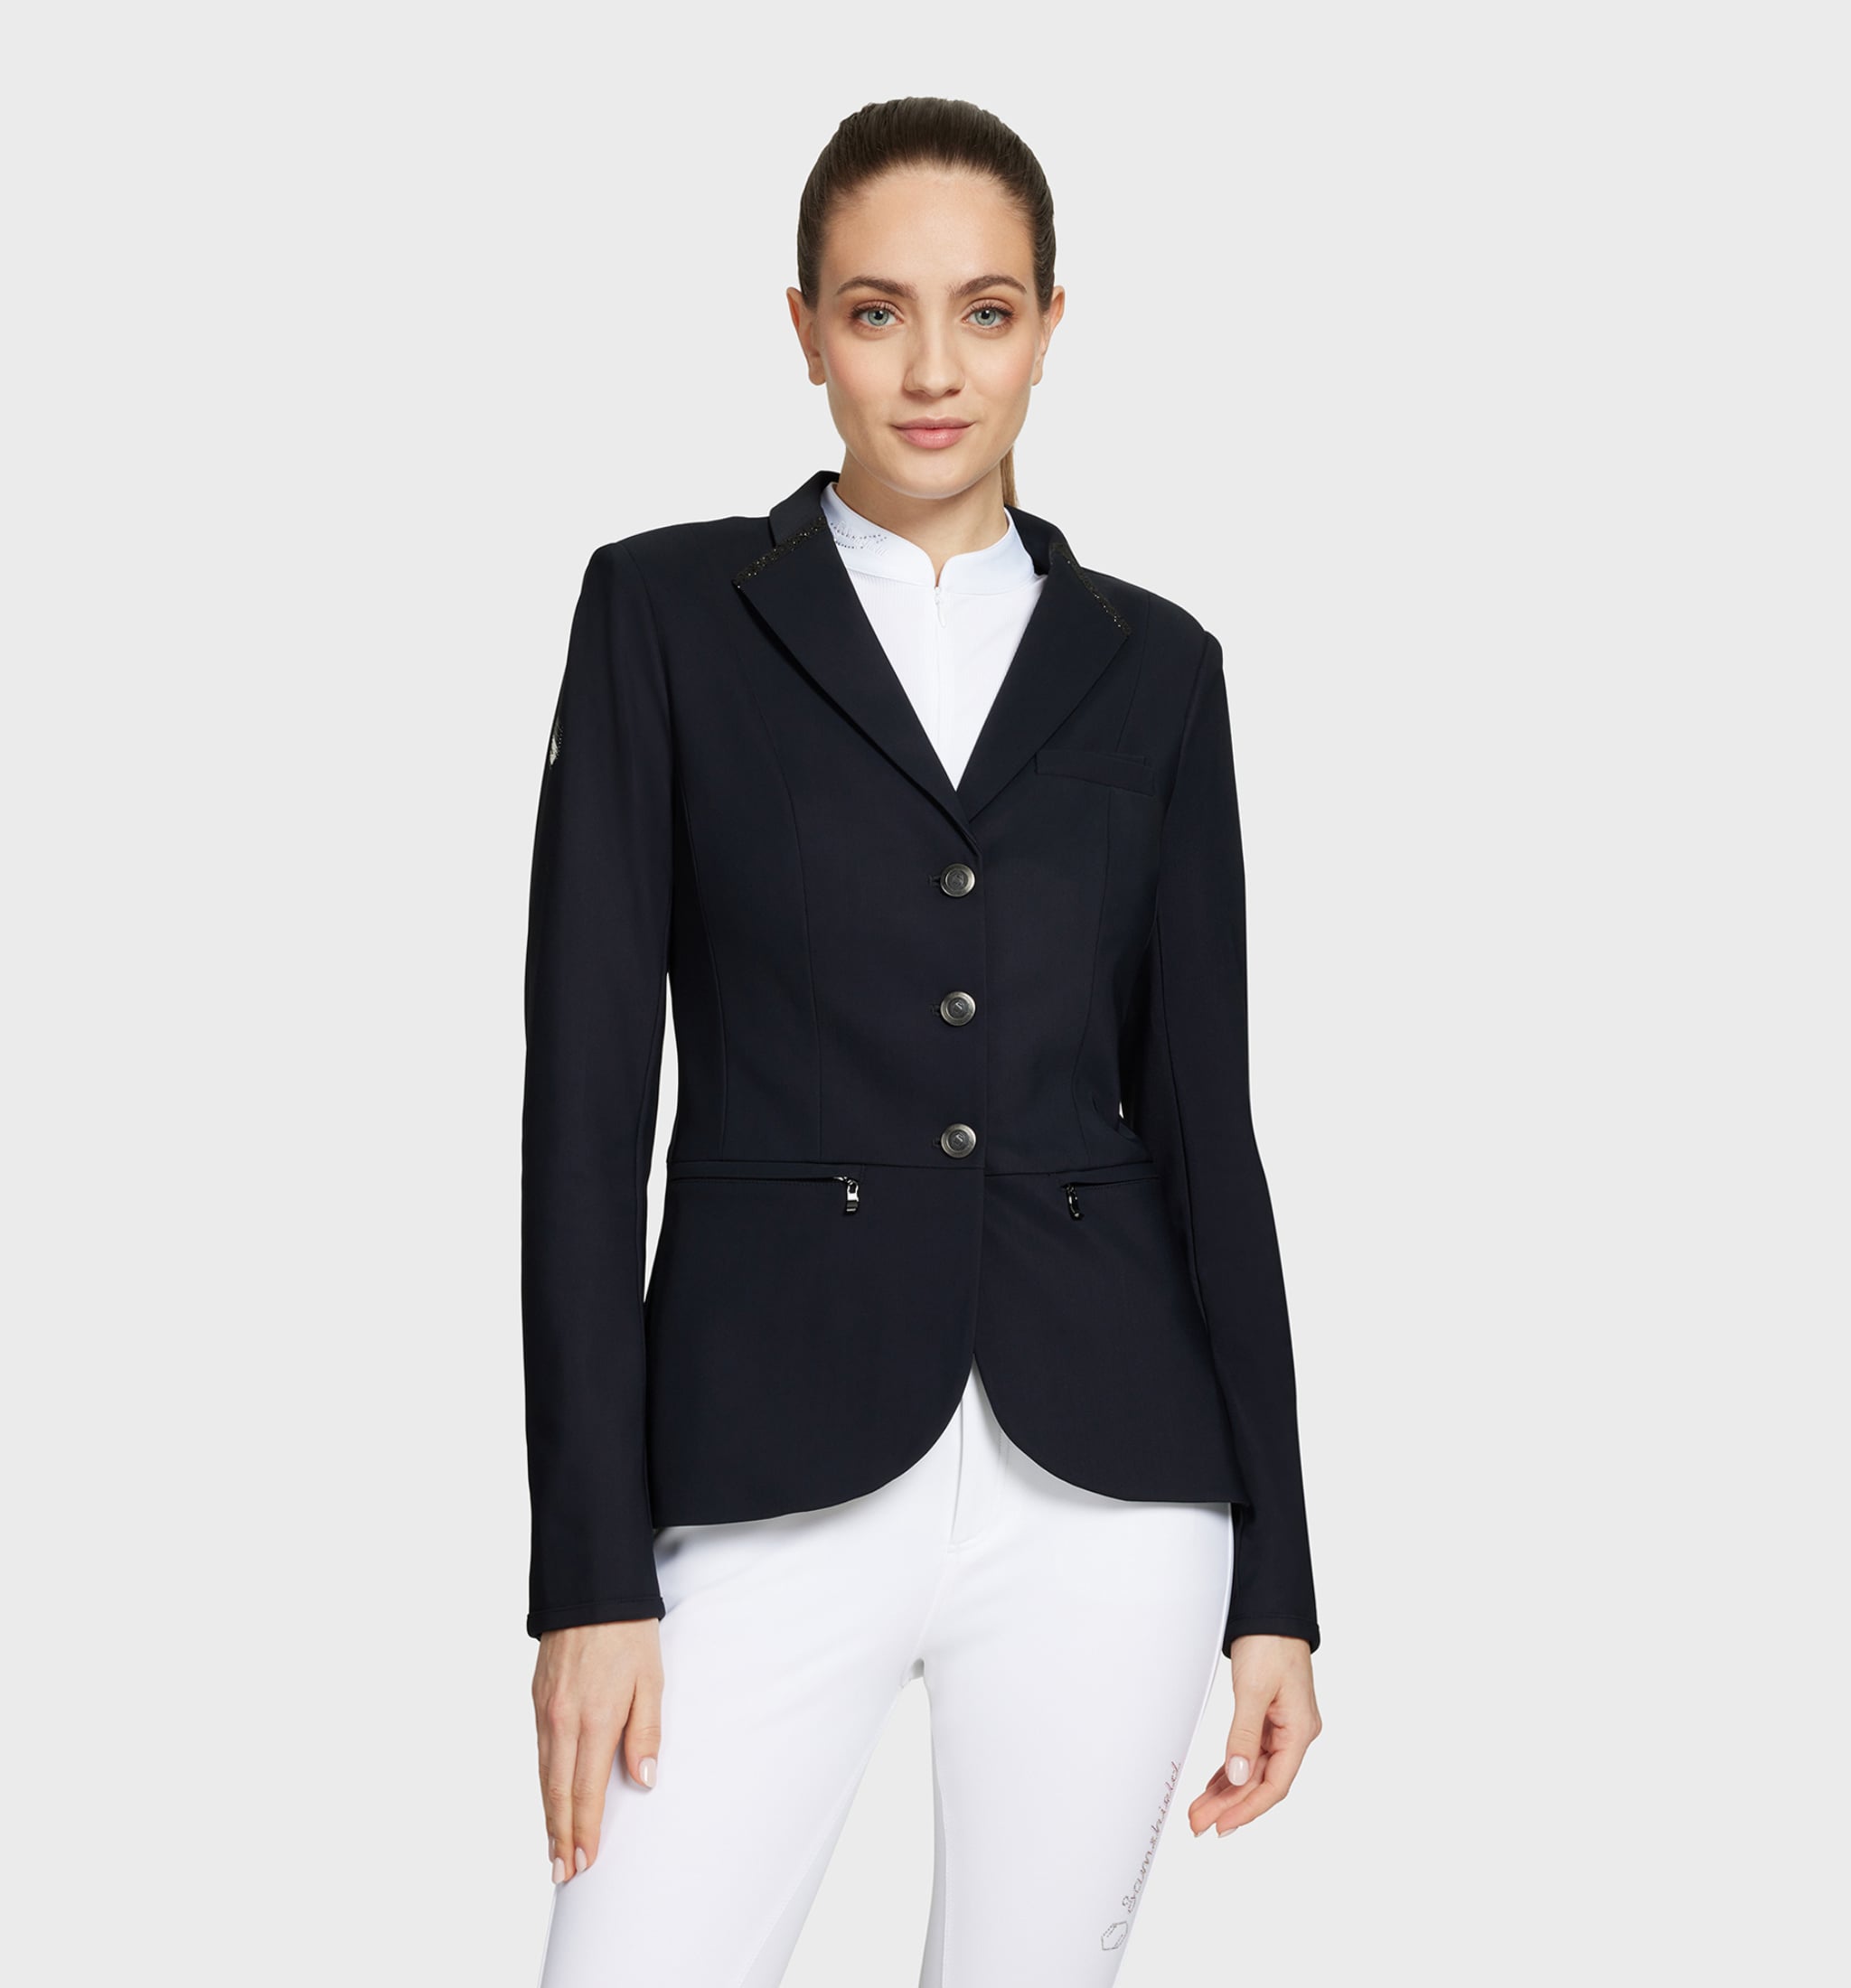 Victorine Crystal Fabric P24 Competition Jacket - Black